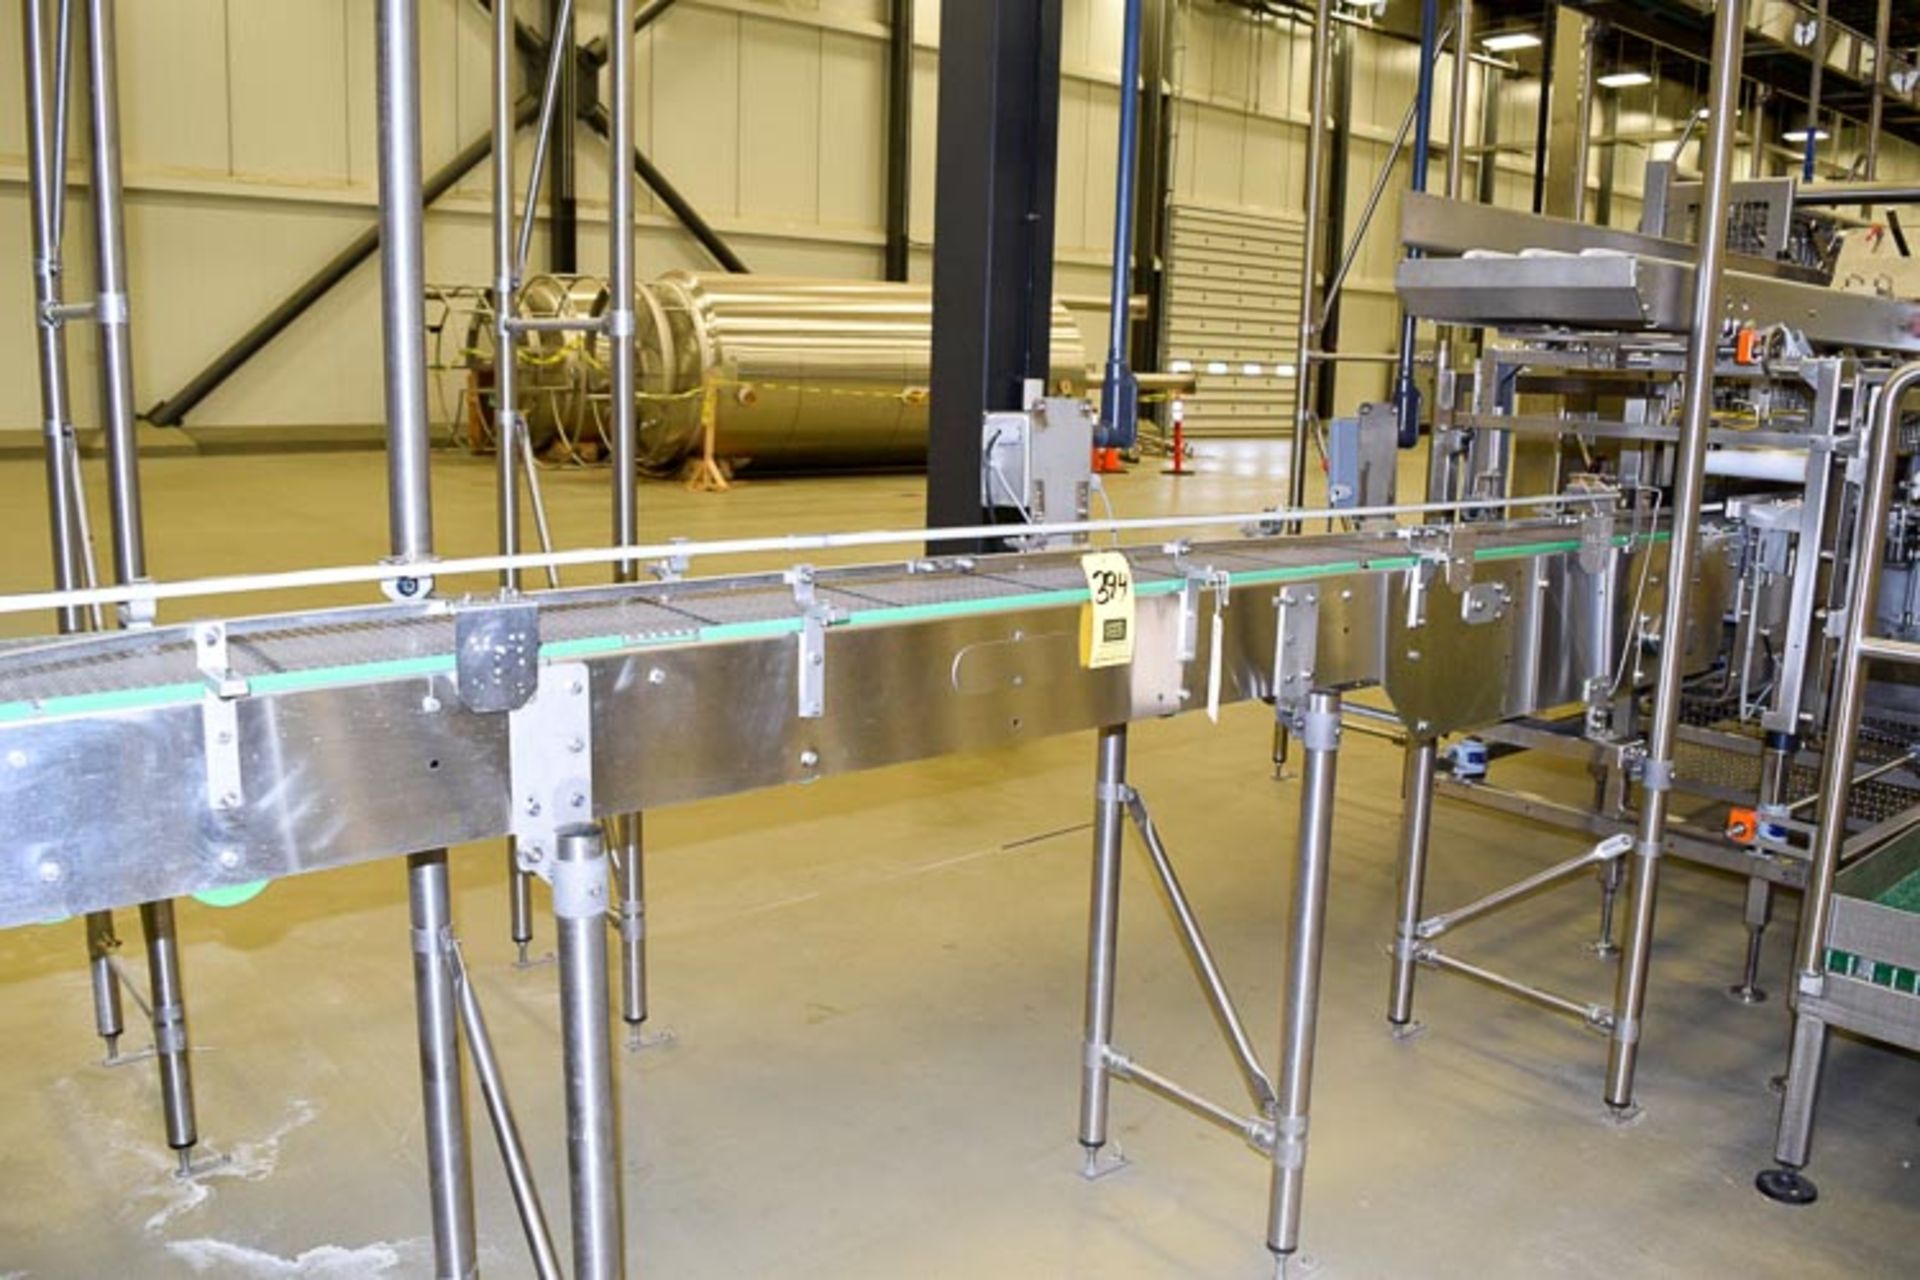 12" x 138" 2012 Sidel S/S Frame Product Conveyor with Interlox Belt - Rigging Fee: $ 150